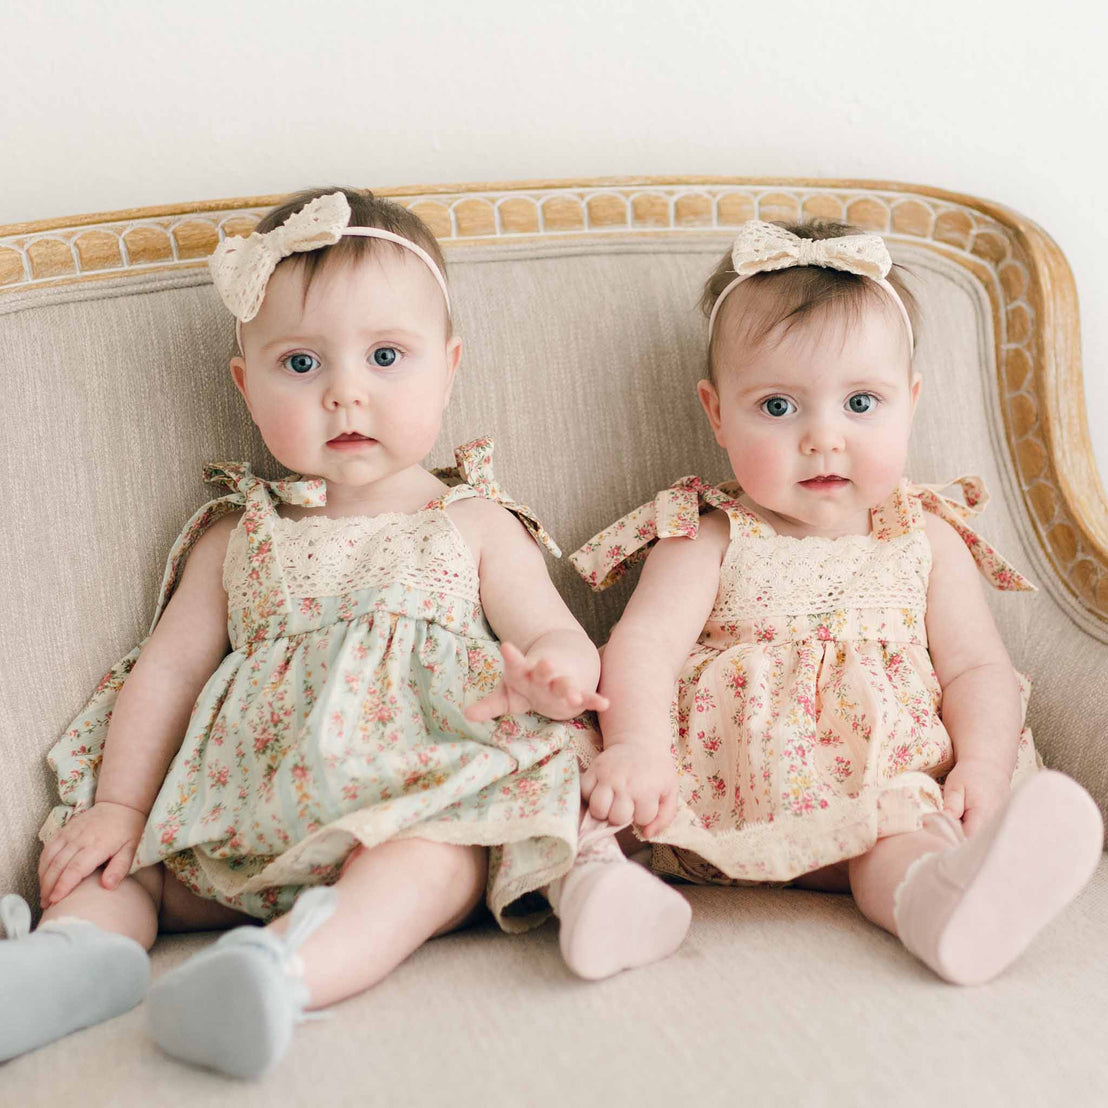 Two twin baby girls wearing the Eloise Romper Dress. One in Powder Blue and the other in Blush. They are also wearing the Eloise Bow Headband.